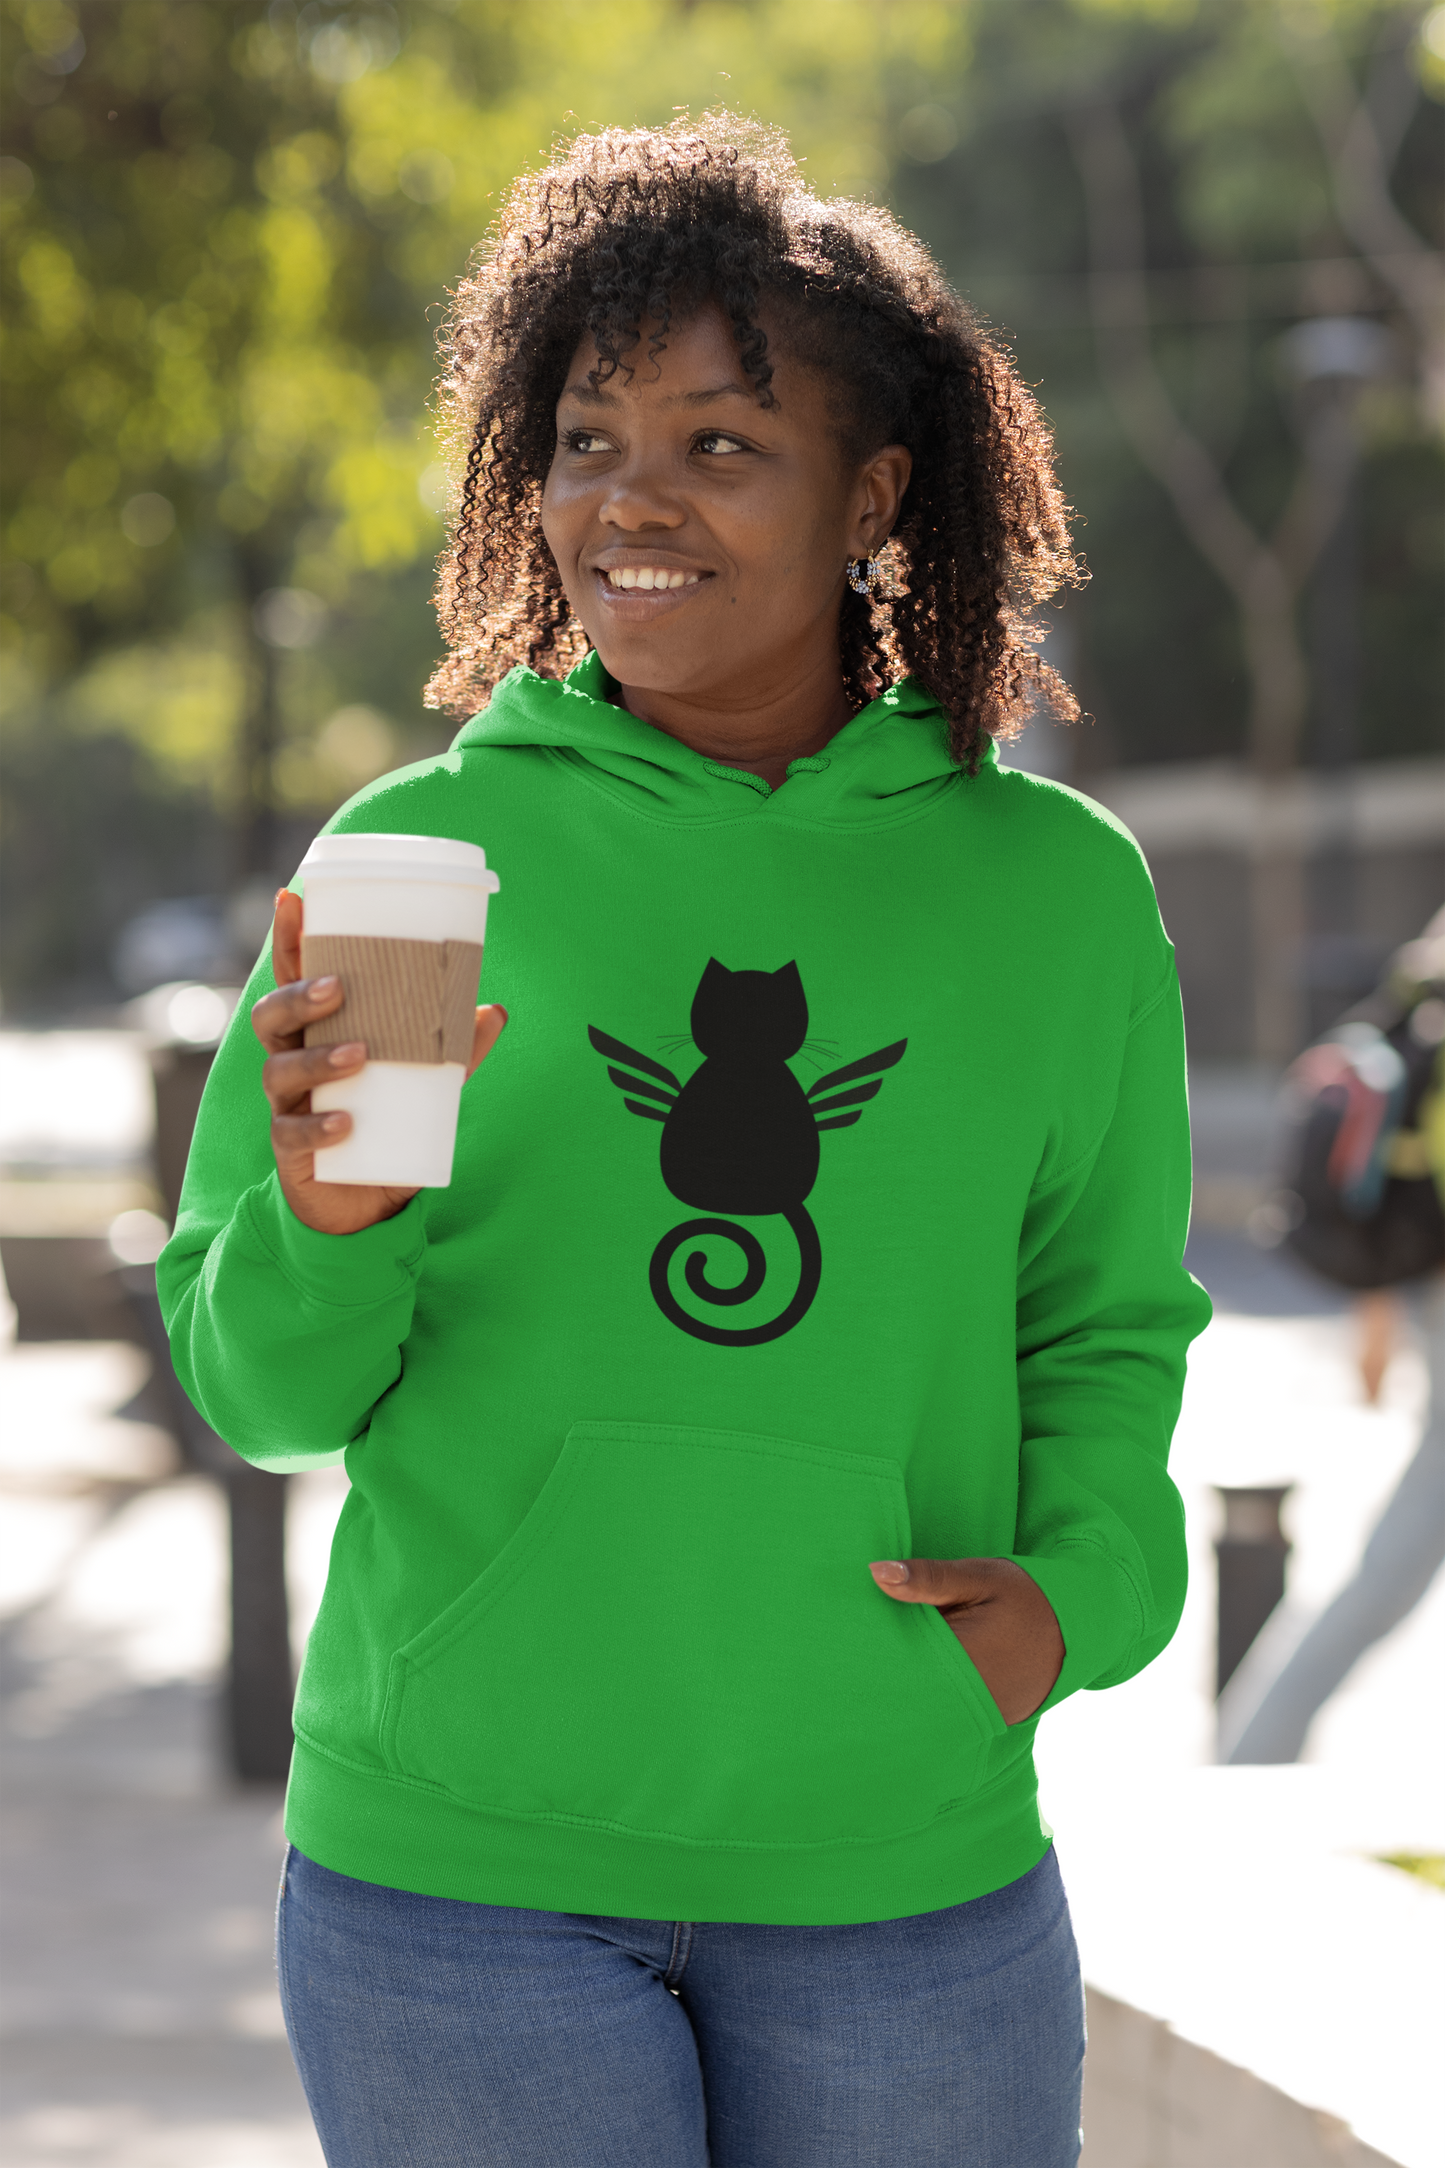 Angelic Kitty Hoodie Inspirational Motivational Apparel Urban Black Owned